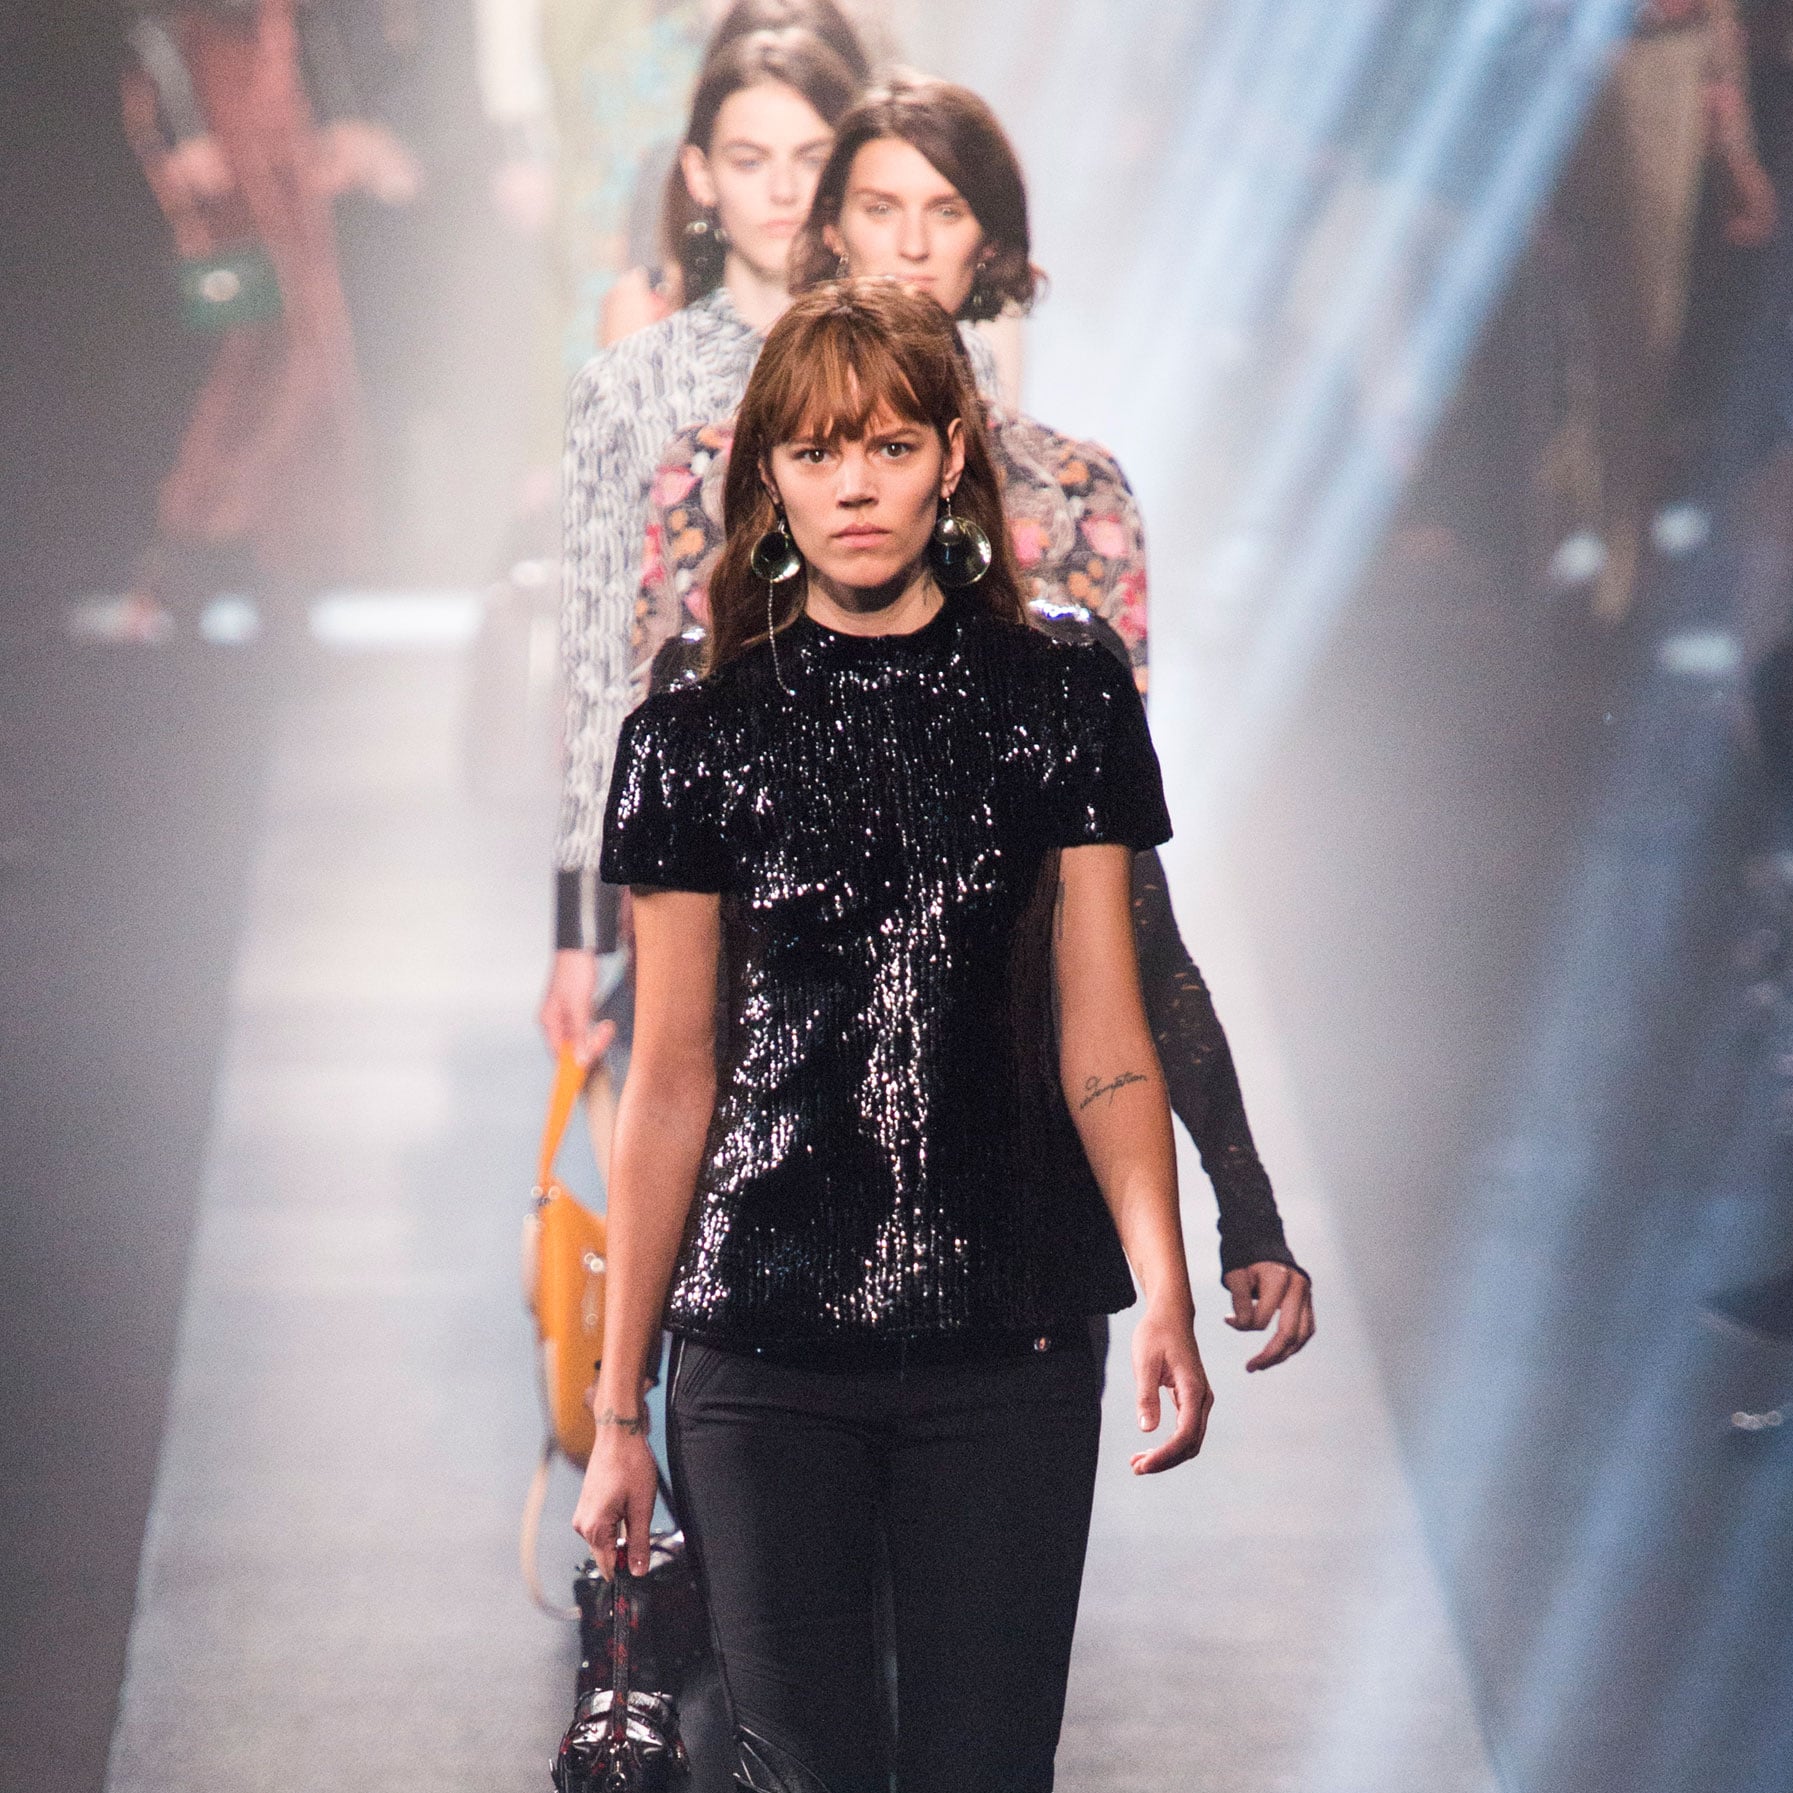 On the catwalk at LVMH Spring-Summer 2015 Fashion Houses Shows #RTW #SS15 # LVMH